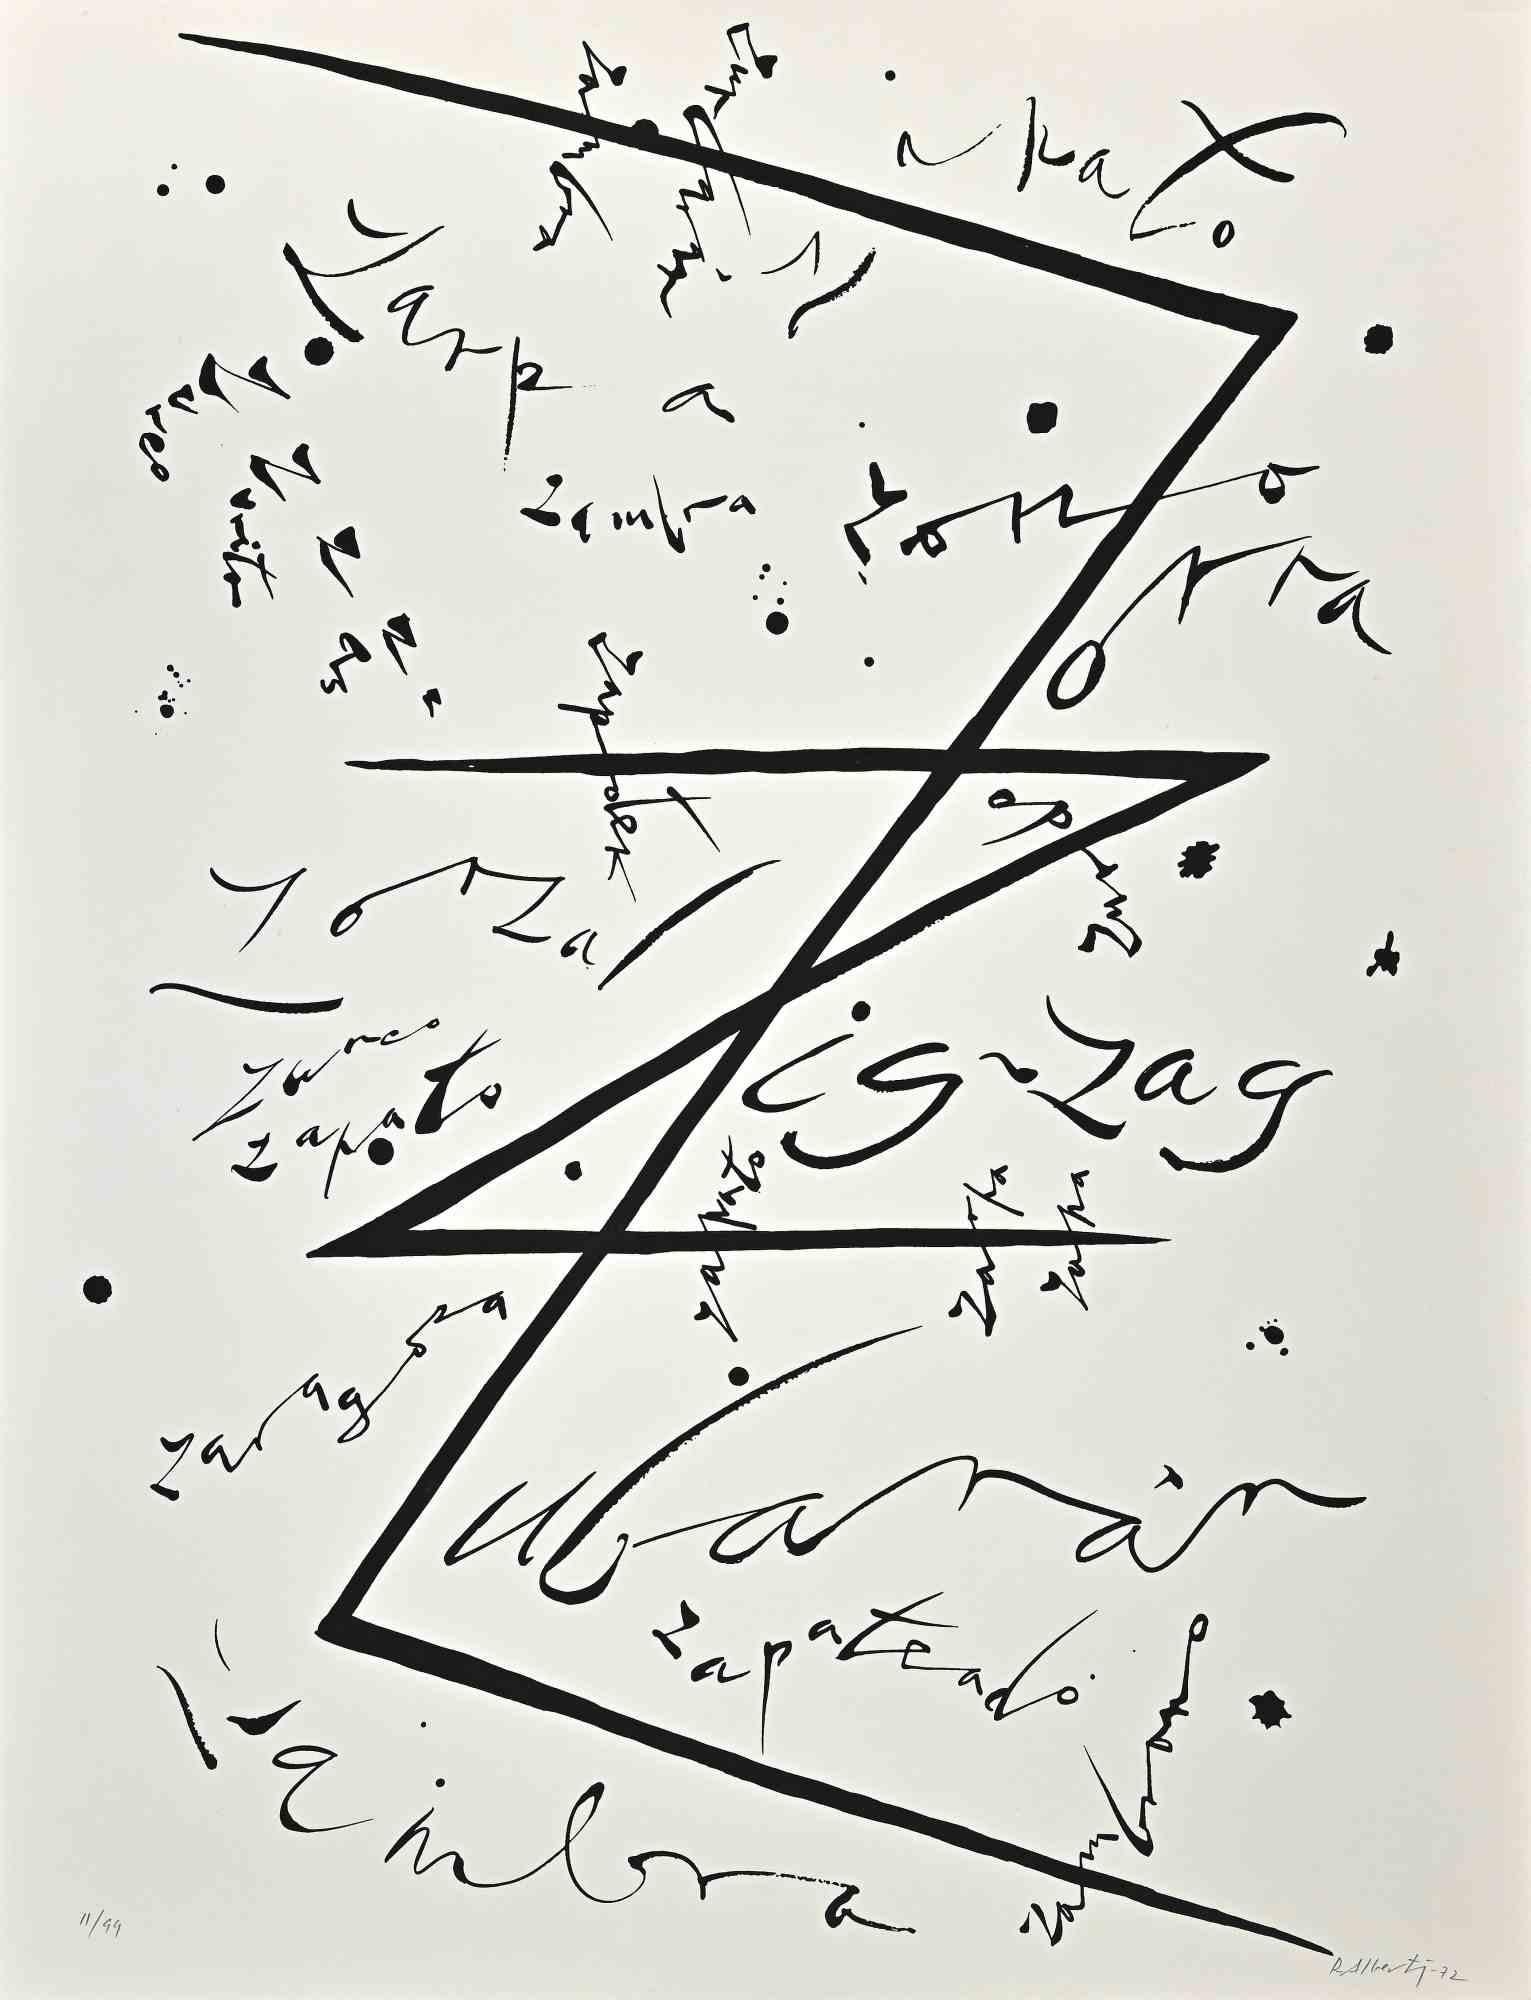 Letter Z from Alphabet series is a lithograph realized by Rafael Alberti in 1972.

Hand-signed and dated on the lower margin.

Numbered on the lower margin. Edition 11/99

The state of preservation is good.

The artwork represents alphabet letter Z,